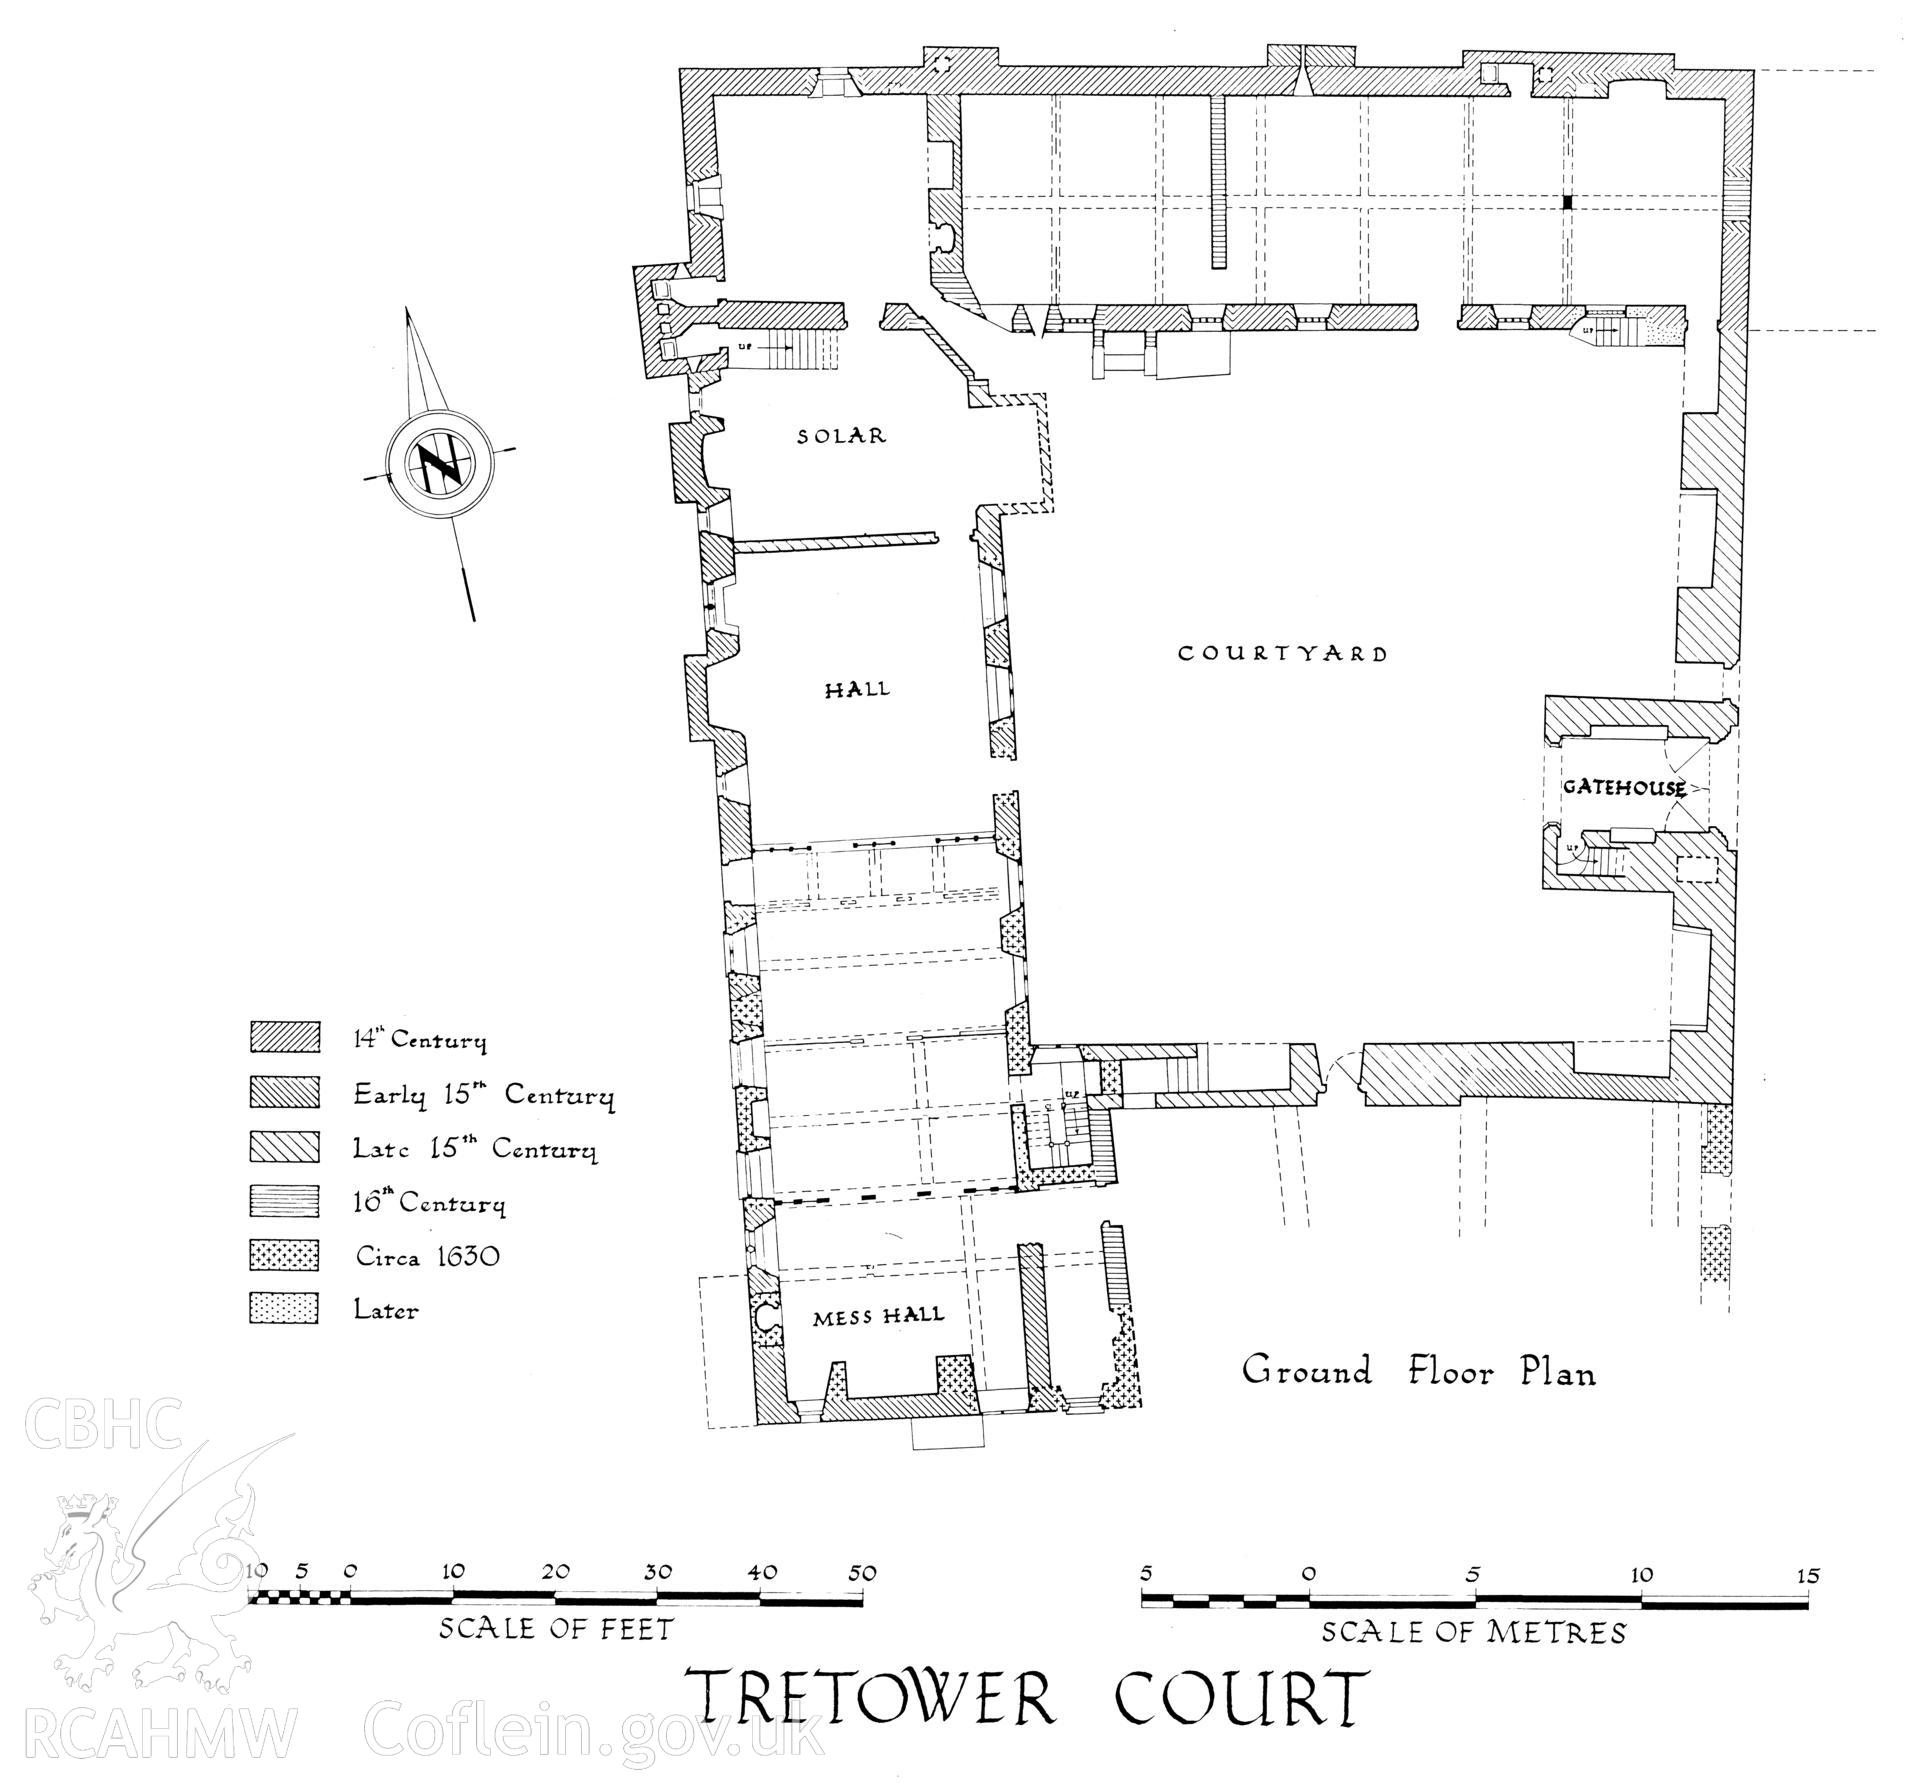 RCAHMW  drawing (ink on paper) showing plan of Tretower Court, Breconshire.